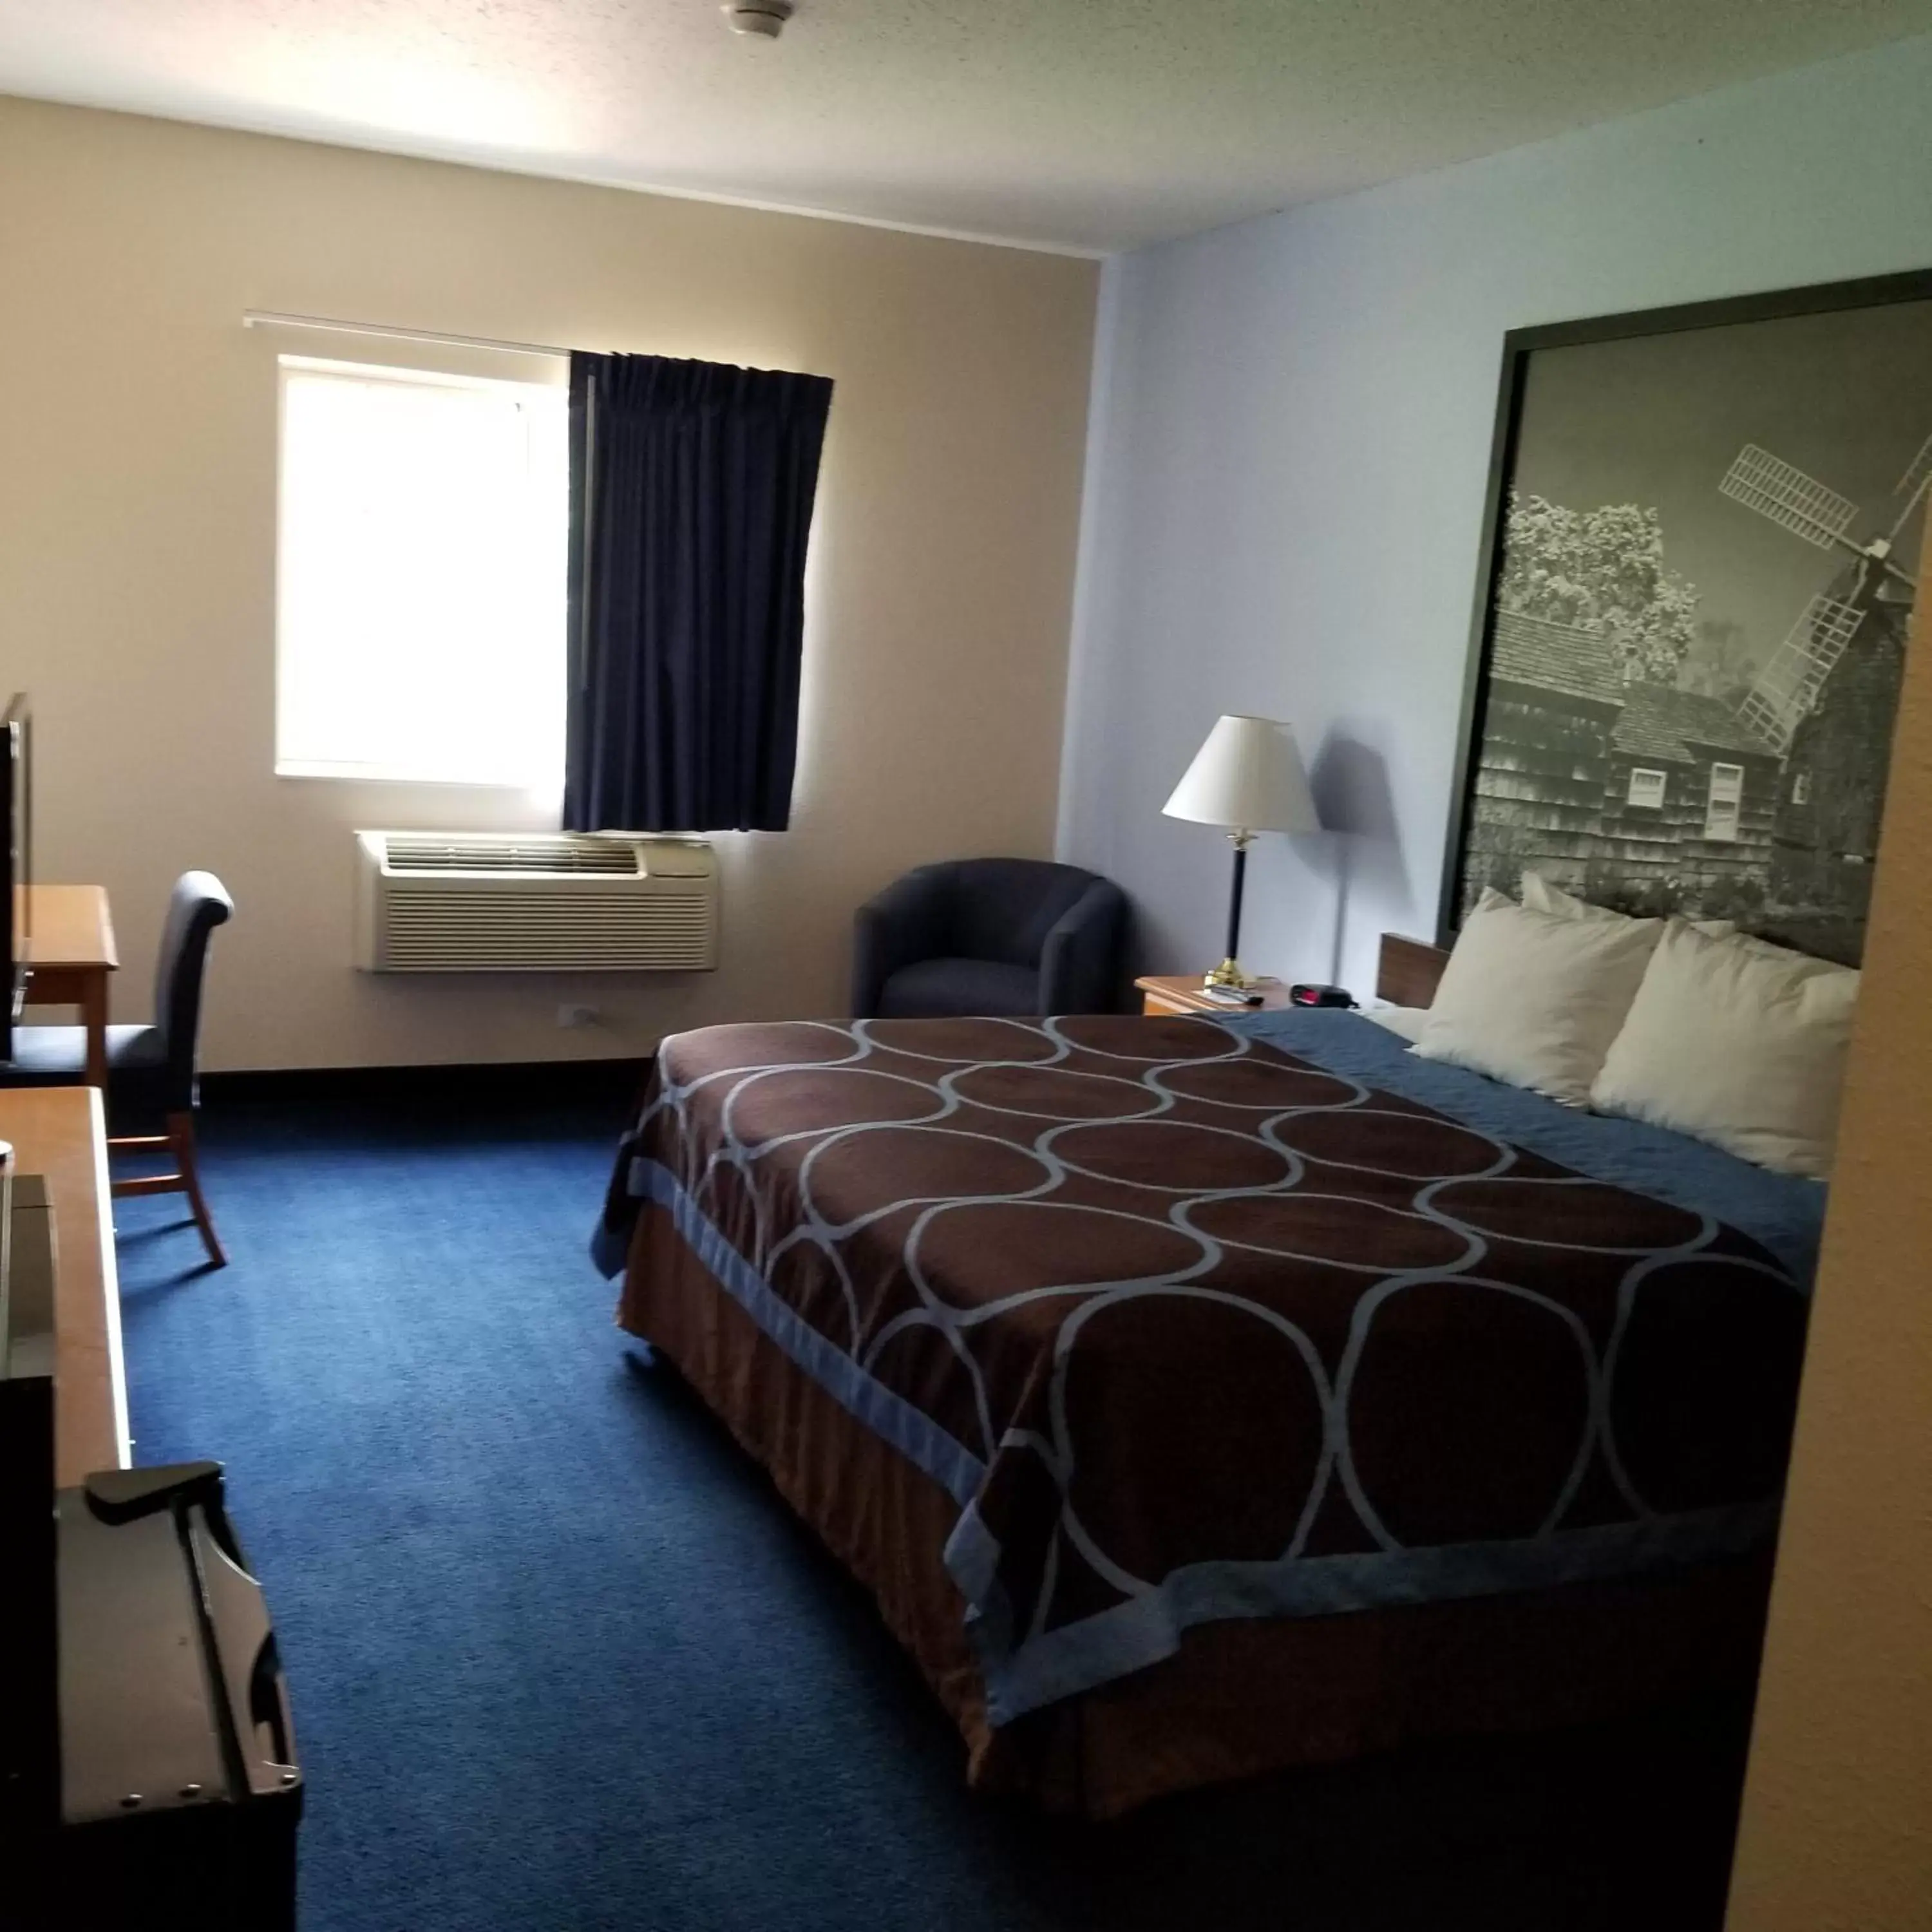 Bed in Super 8 by Wyndham Cobleskill NY